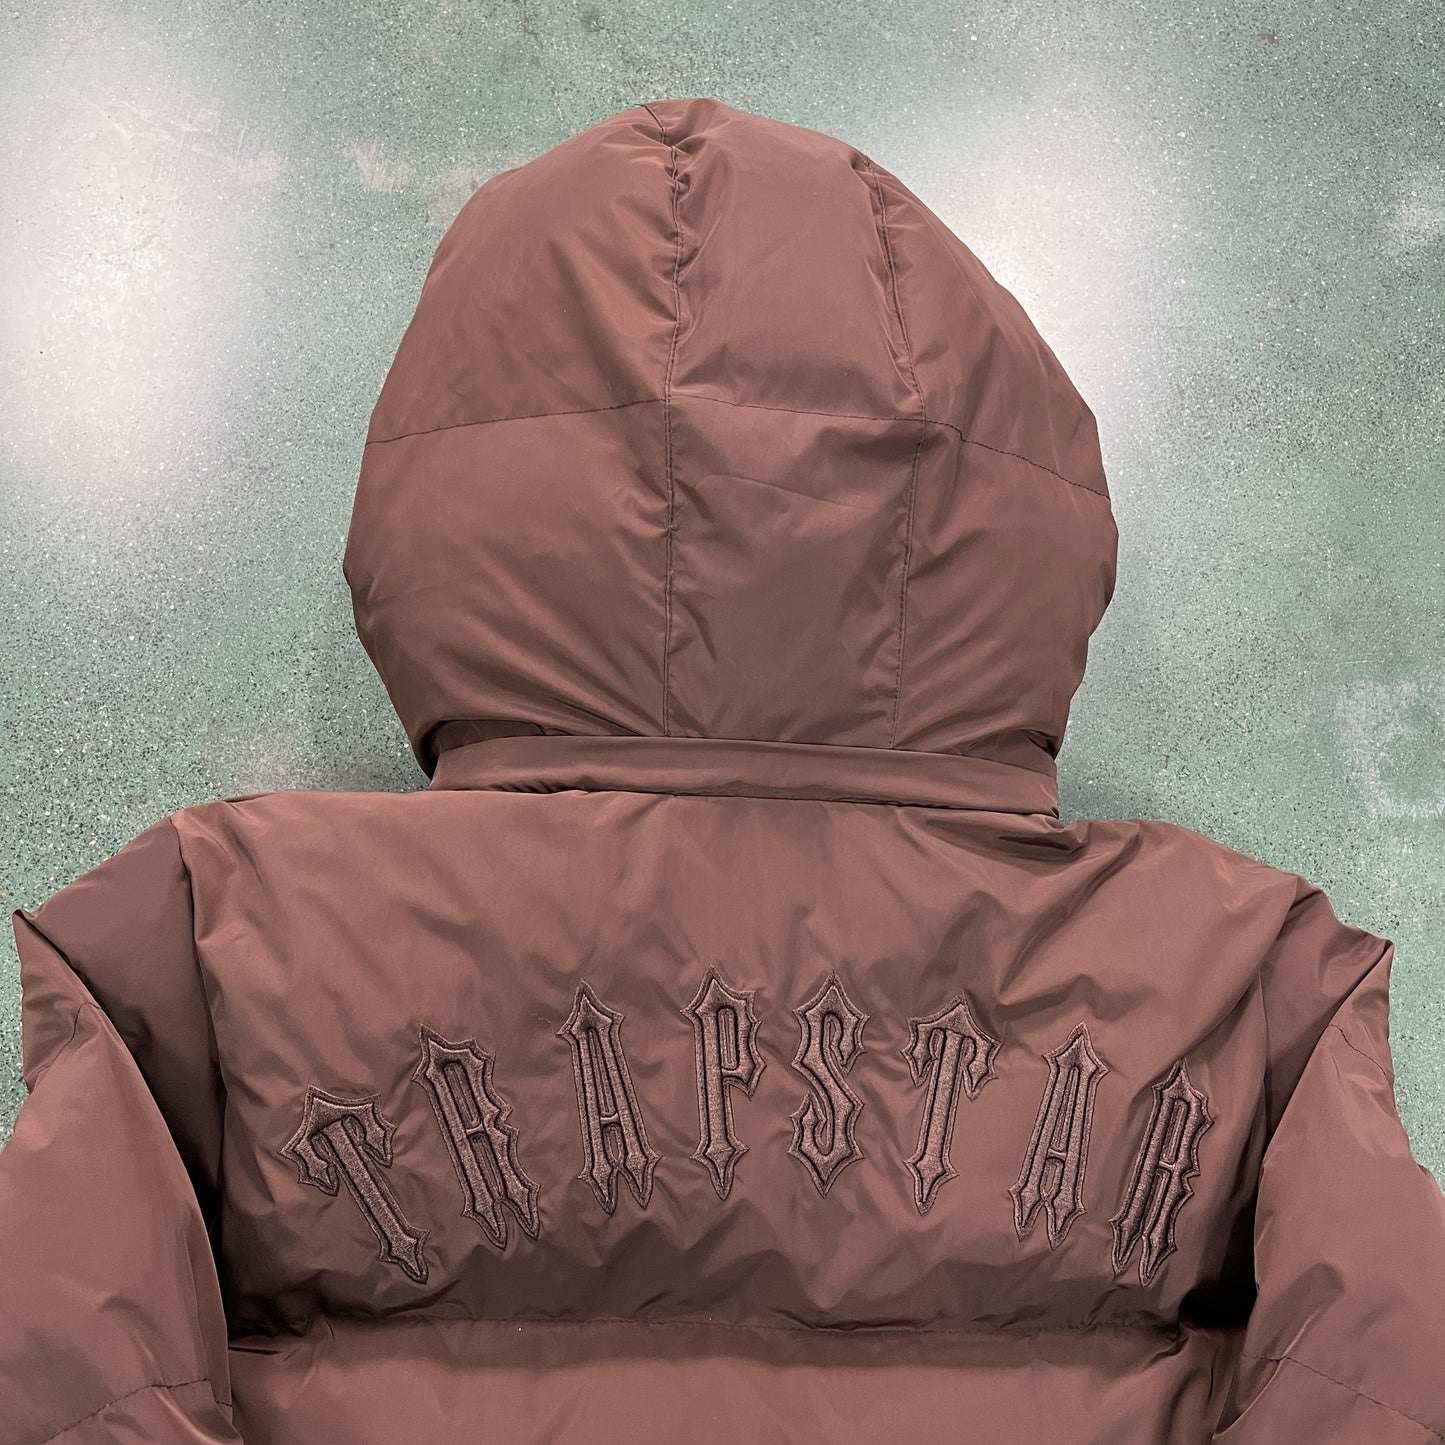 Trapstar Hyperdrive Detachable Hooded Puffer Jacket-Brown